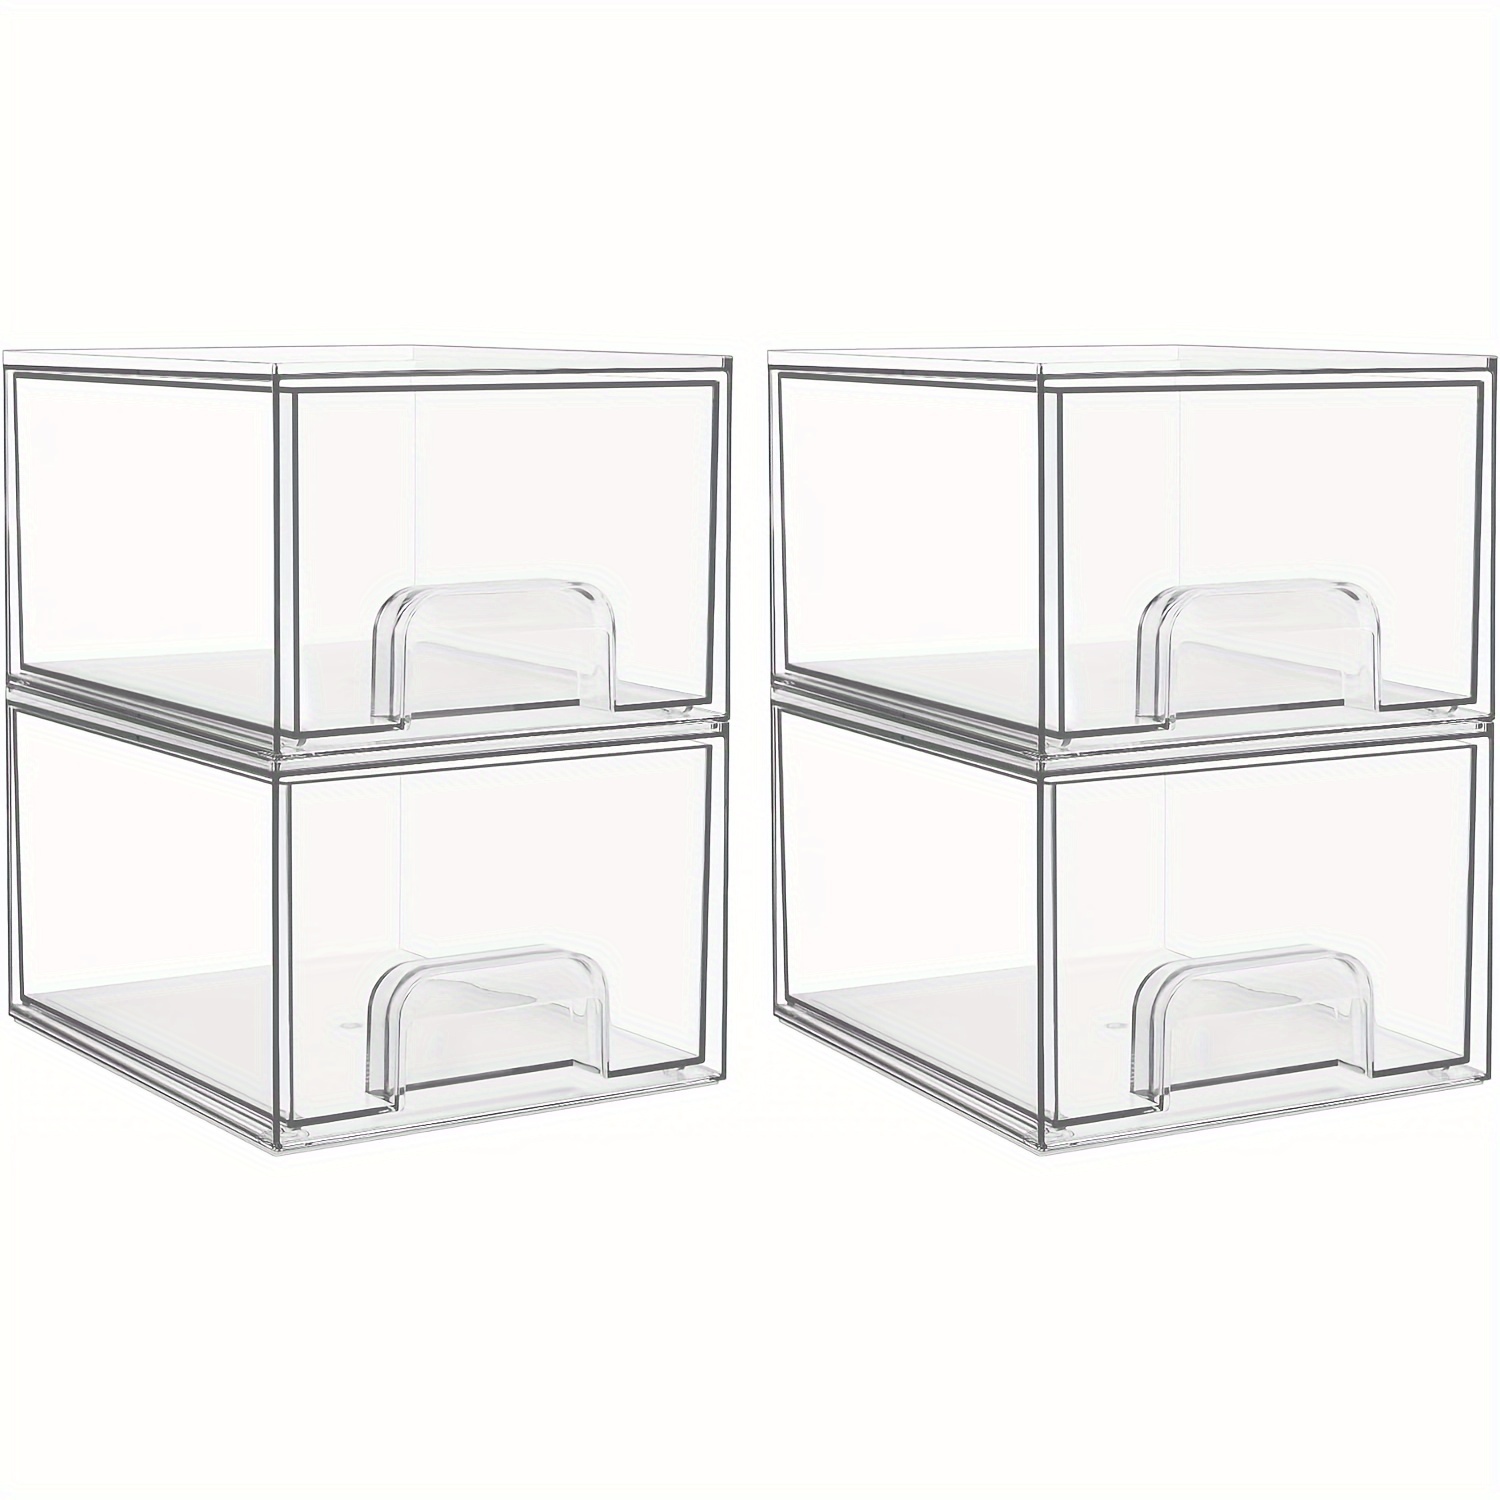 

2/4pcs Clear Stackable Makeup Organizer, Storage Drawers For Countertop, Cosmetic Storage Boxes For Vanity, Bathroom, Kitchen Cabinets, Home Organization And Storage